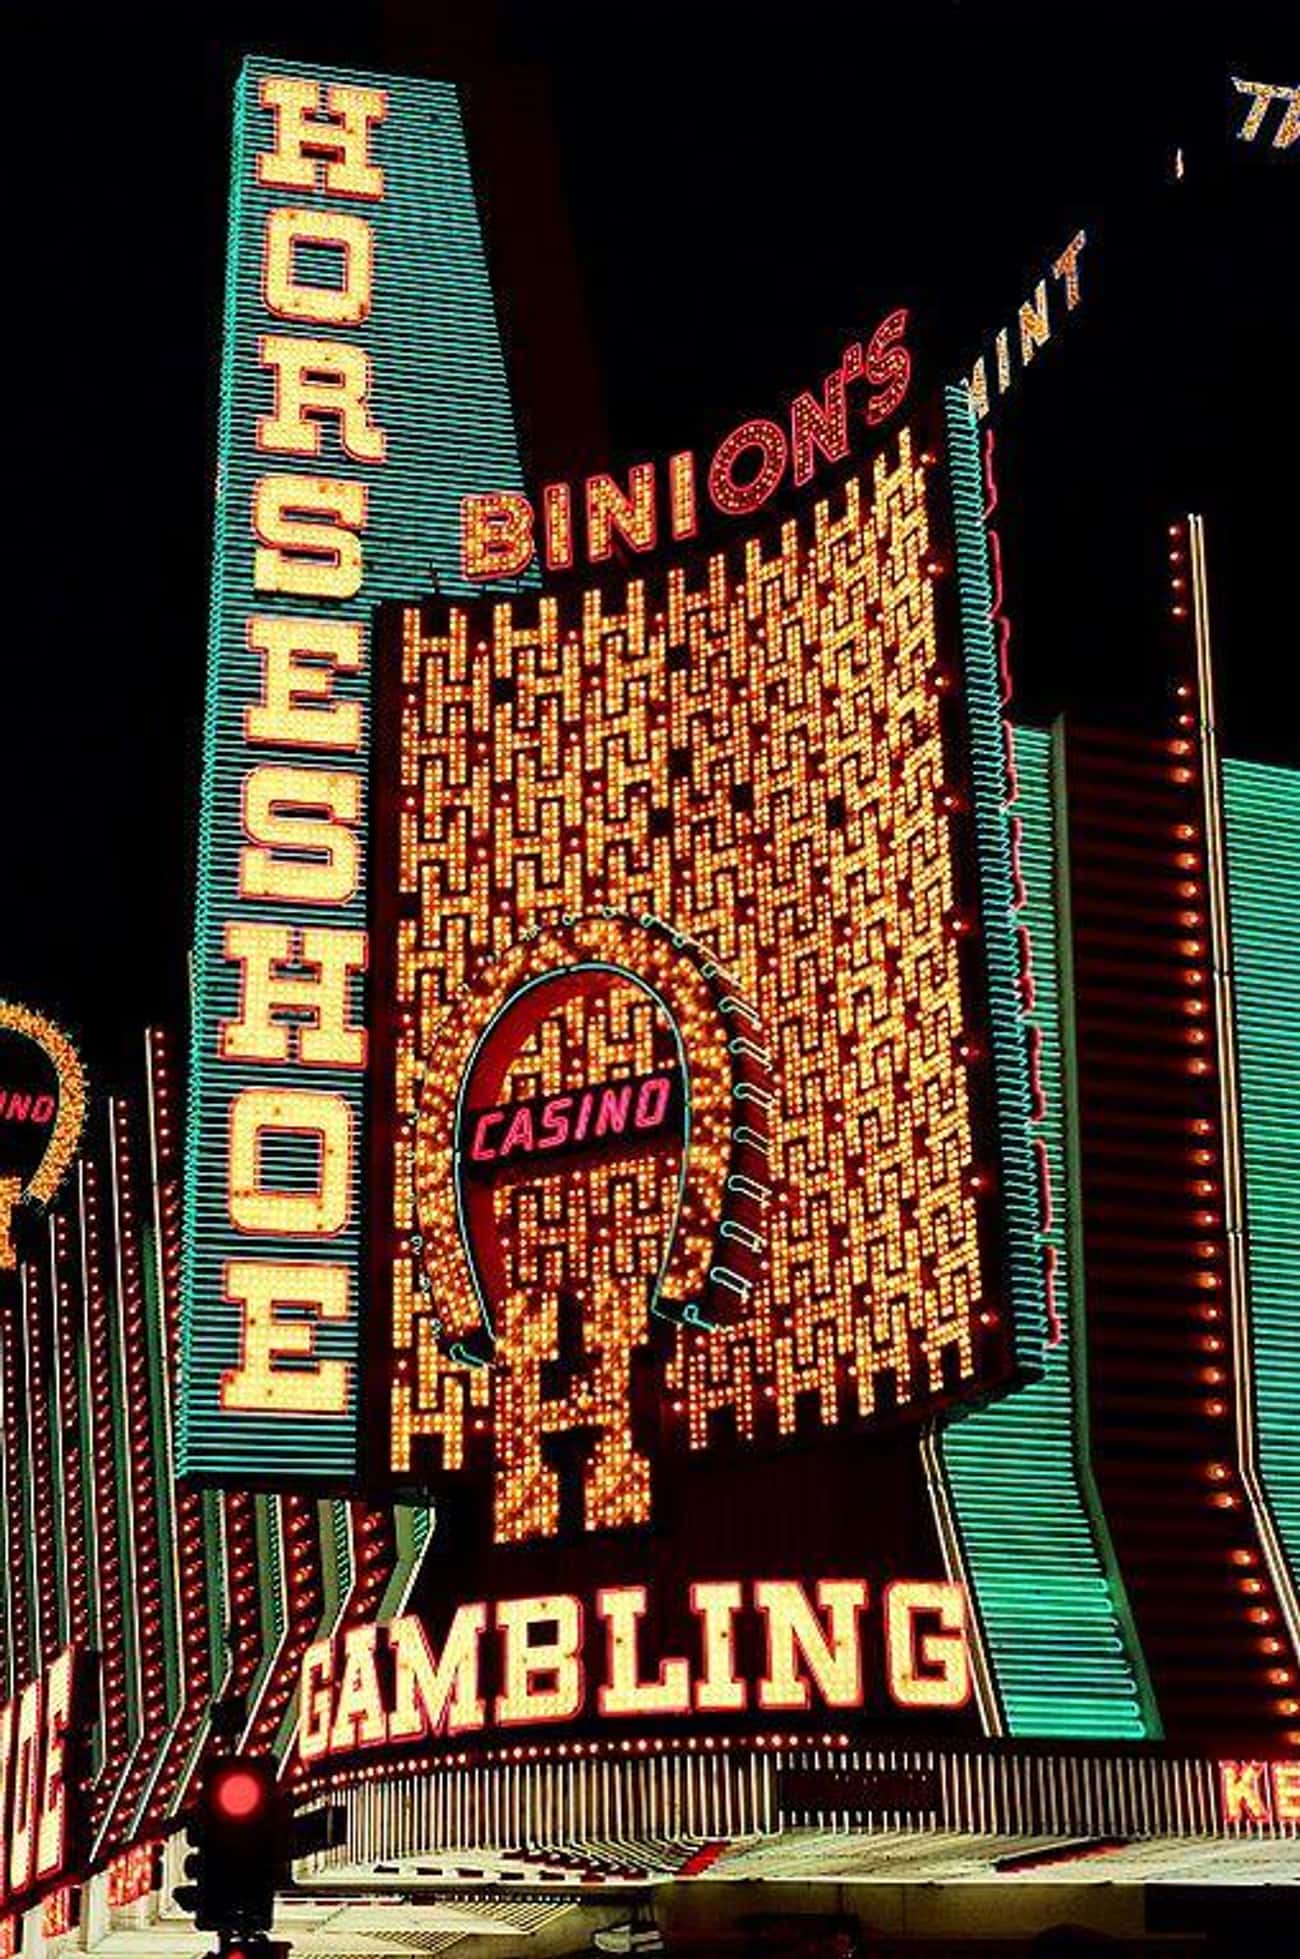 The Binion Family Owned The Horsehoe Until 2004